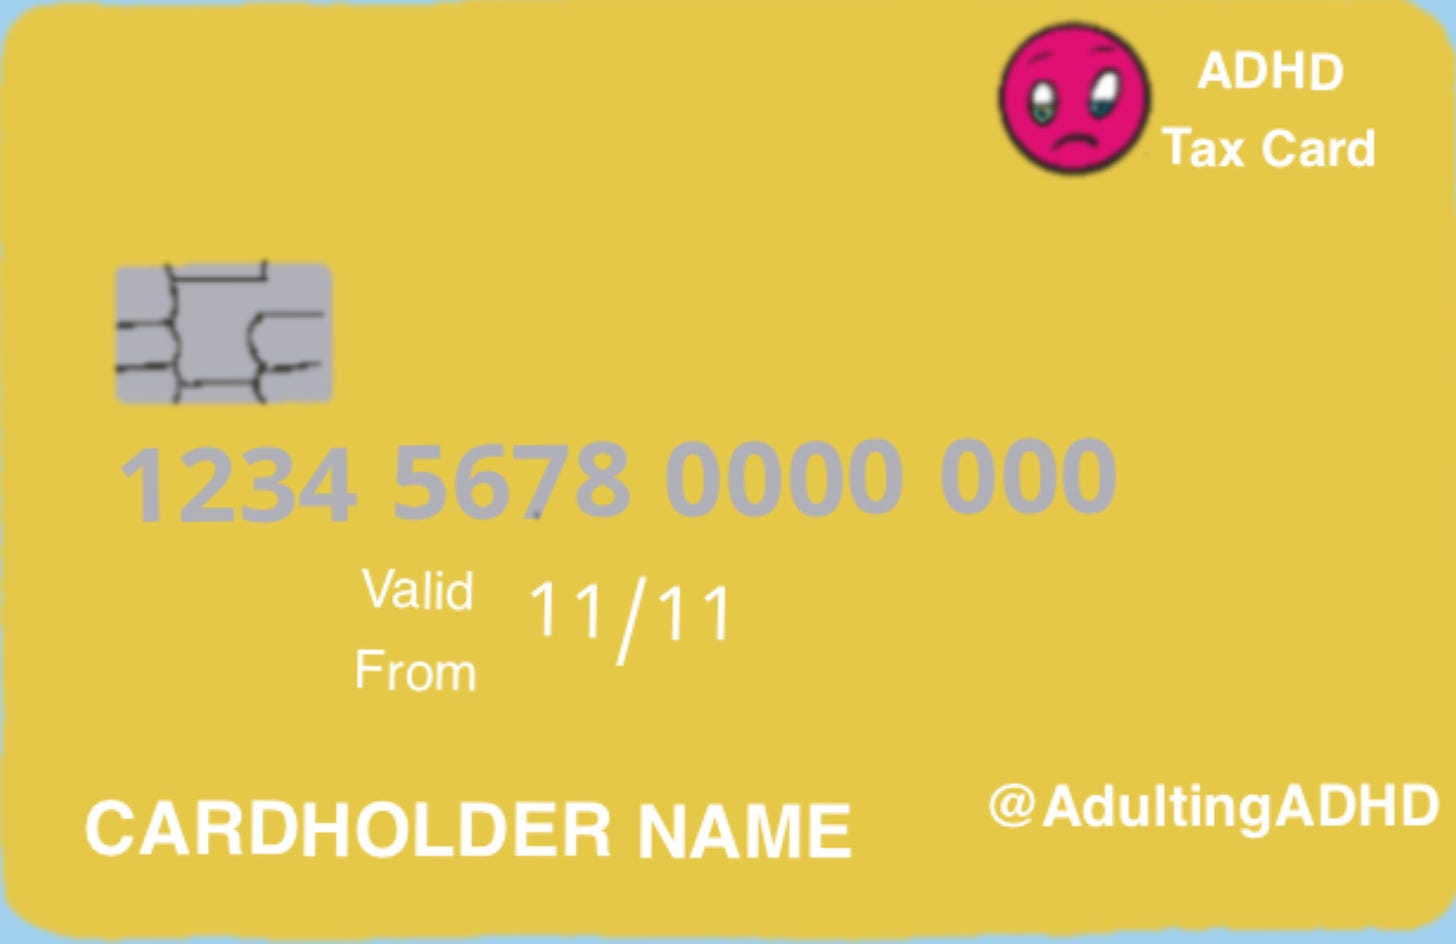 An image of a credit card titled ‘ADHD Tax Card’, with a pink sad face as the credit card logo